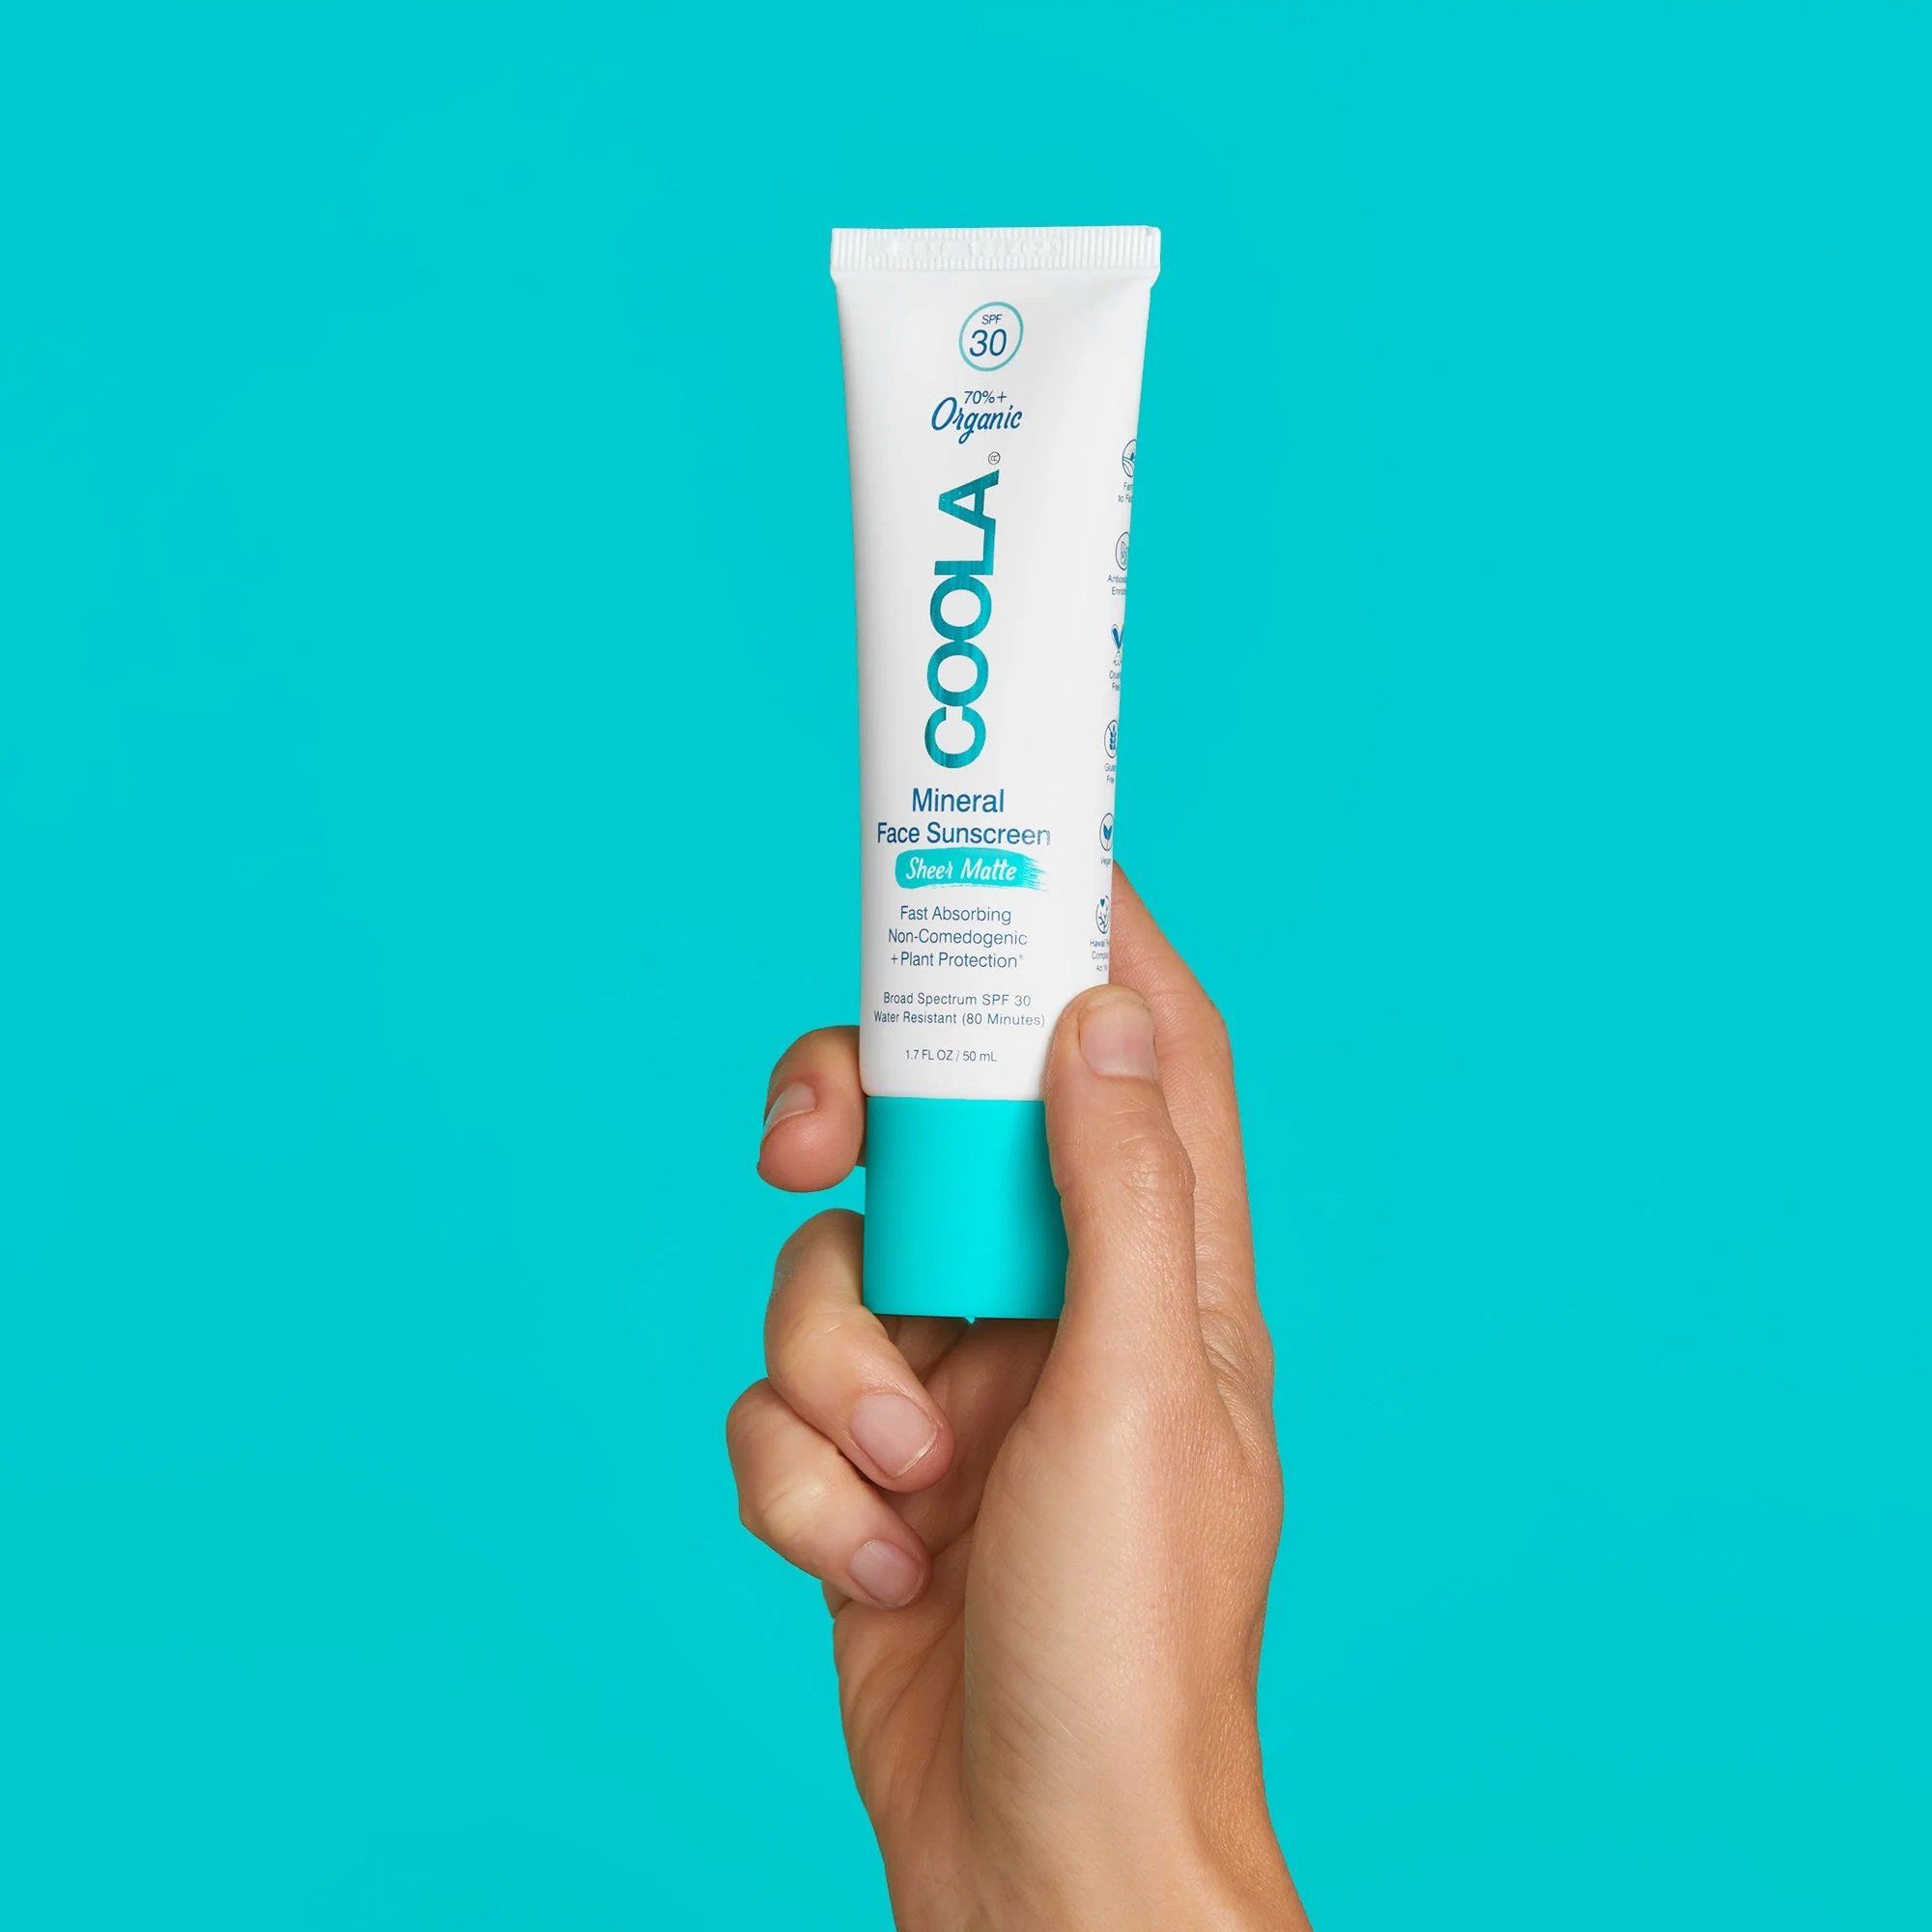 COOLA Mineral Face Organic Tinted Sunscreen Lotion, Sheer Matte, SPF 30 – 1.7 fl oz